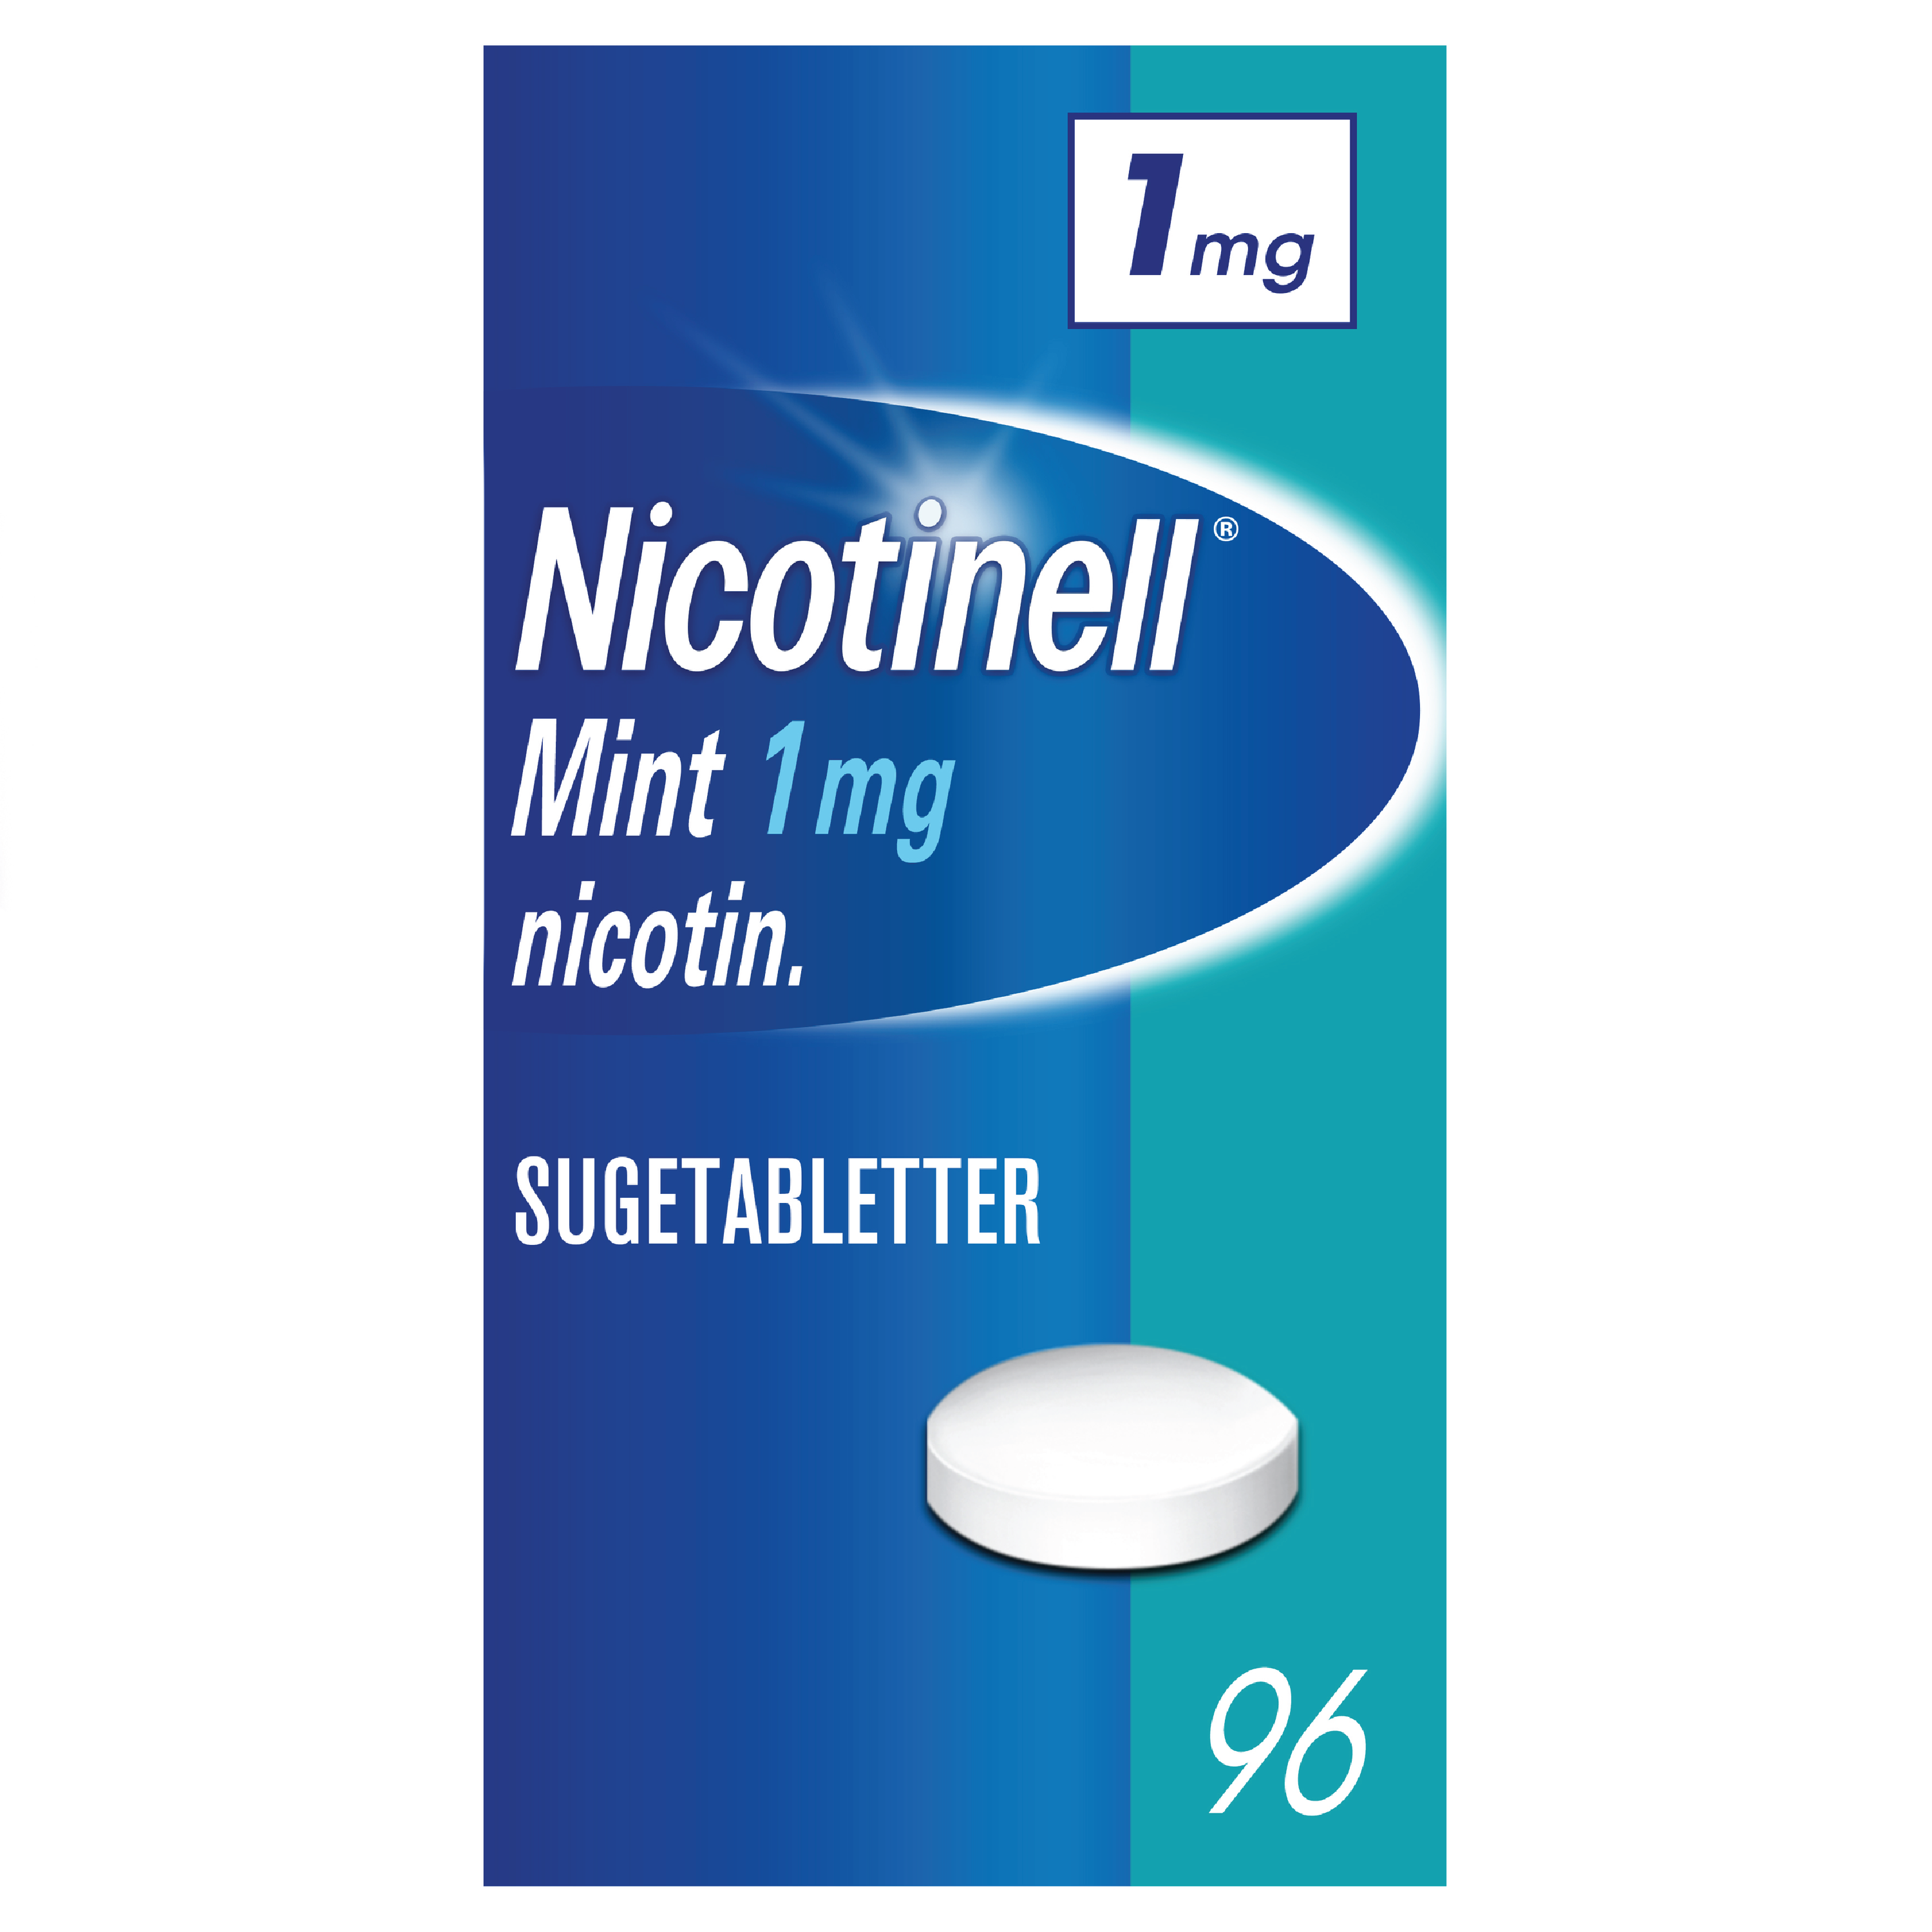 Nicotinell Sugetabletter 1mg, 96 stk.